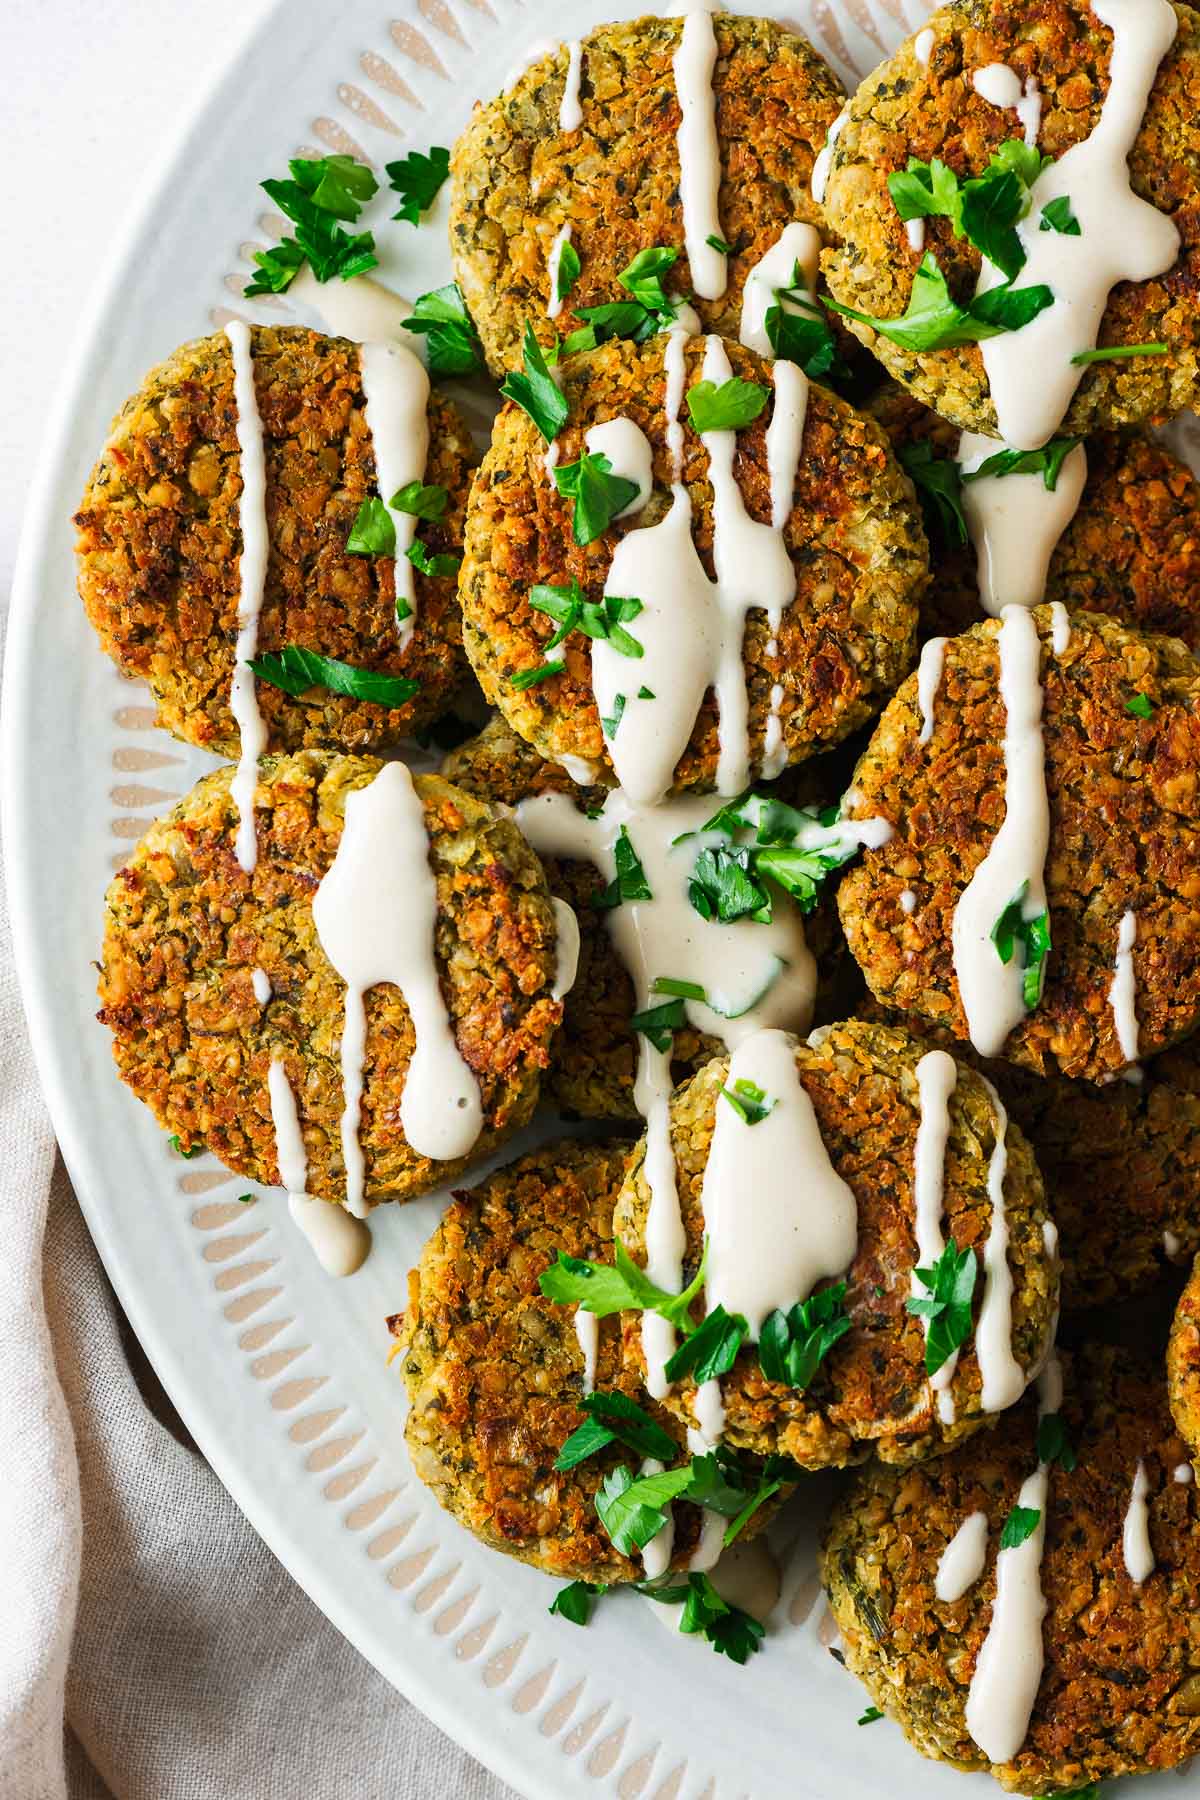 Easy Baked Falafel With Canned Chickpeas